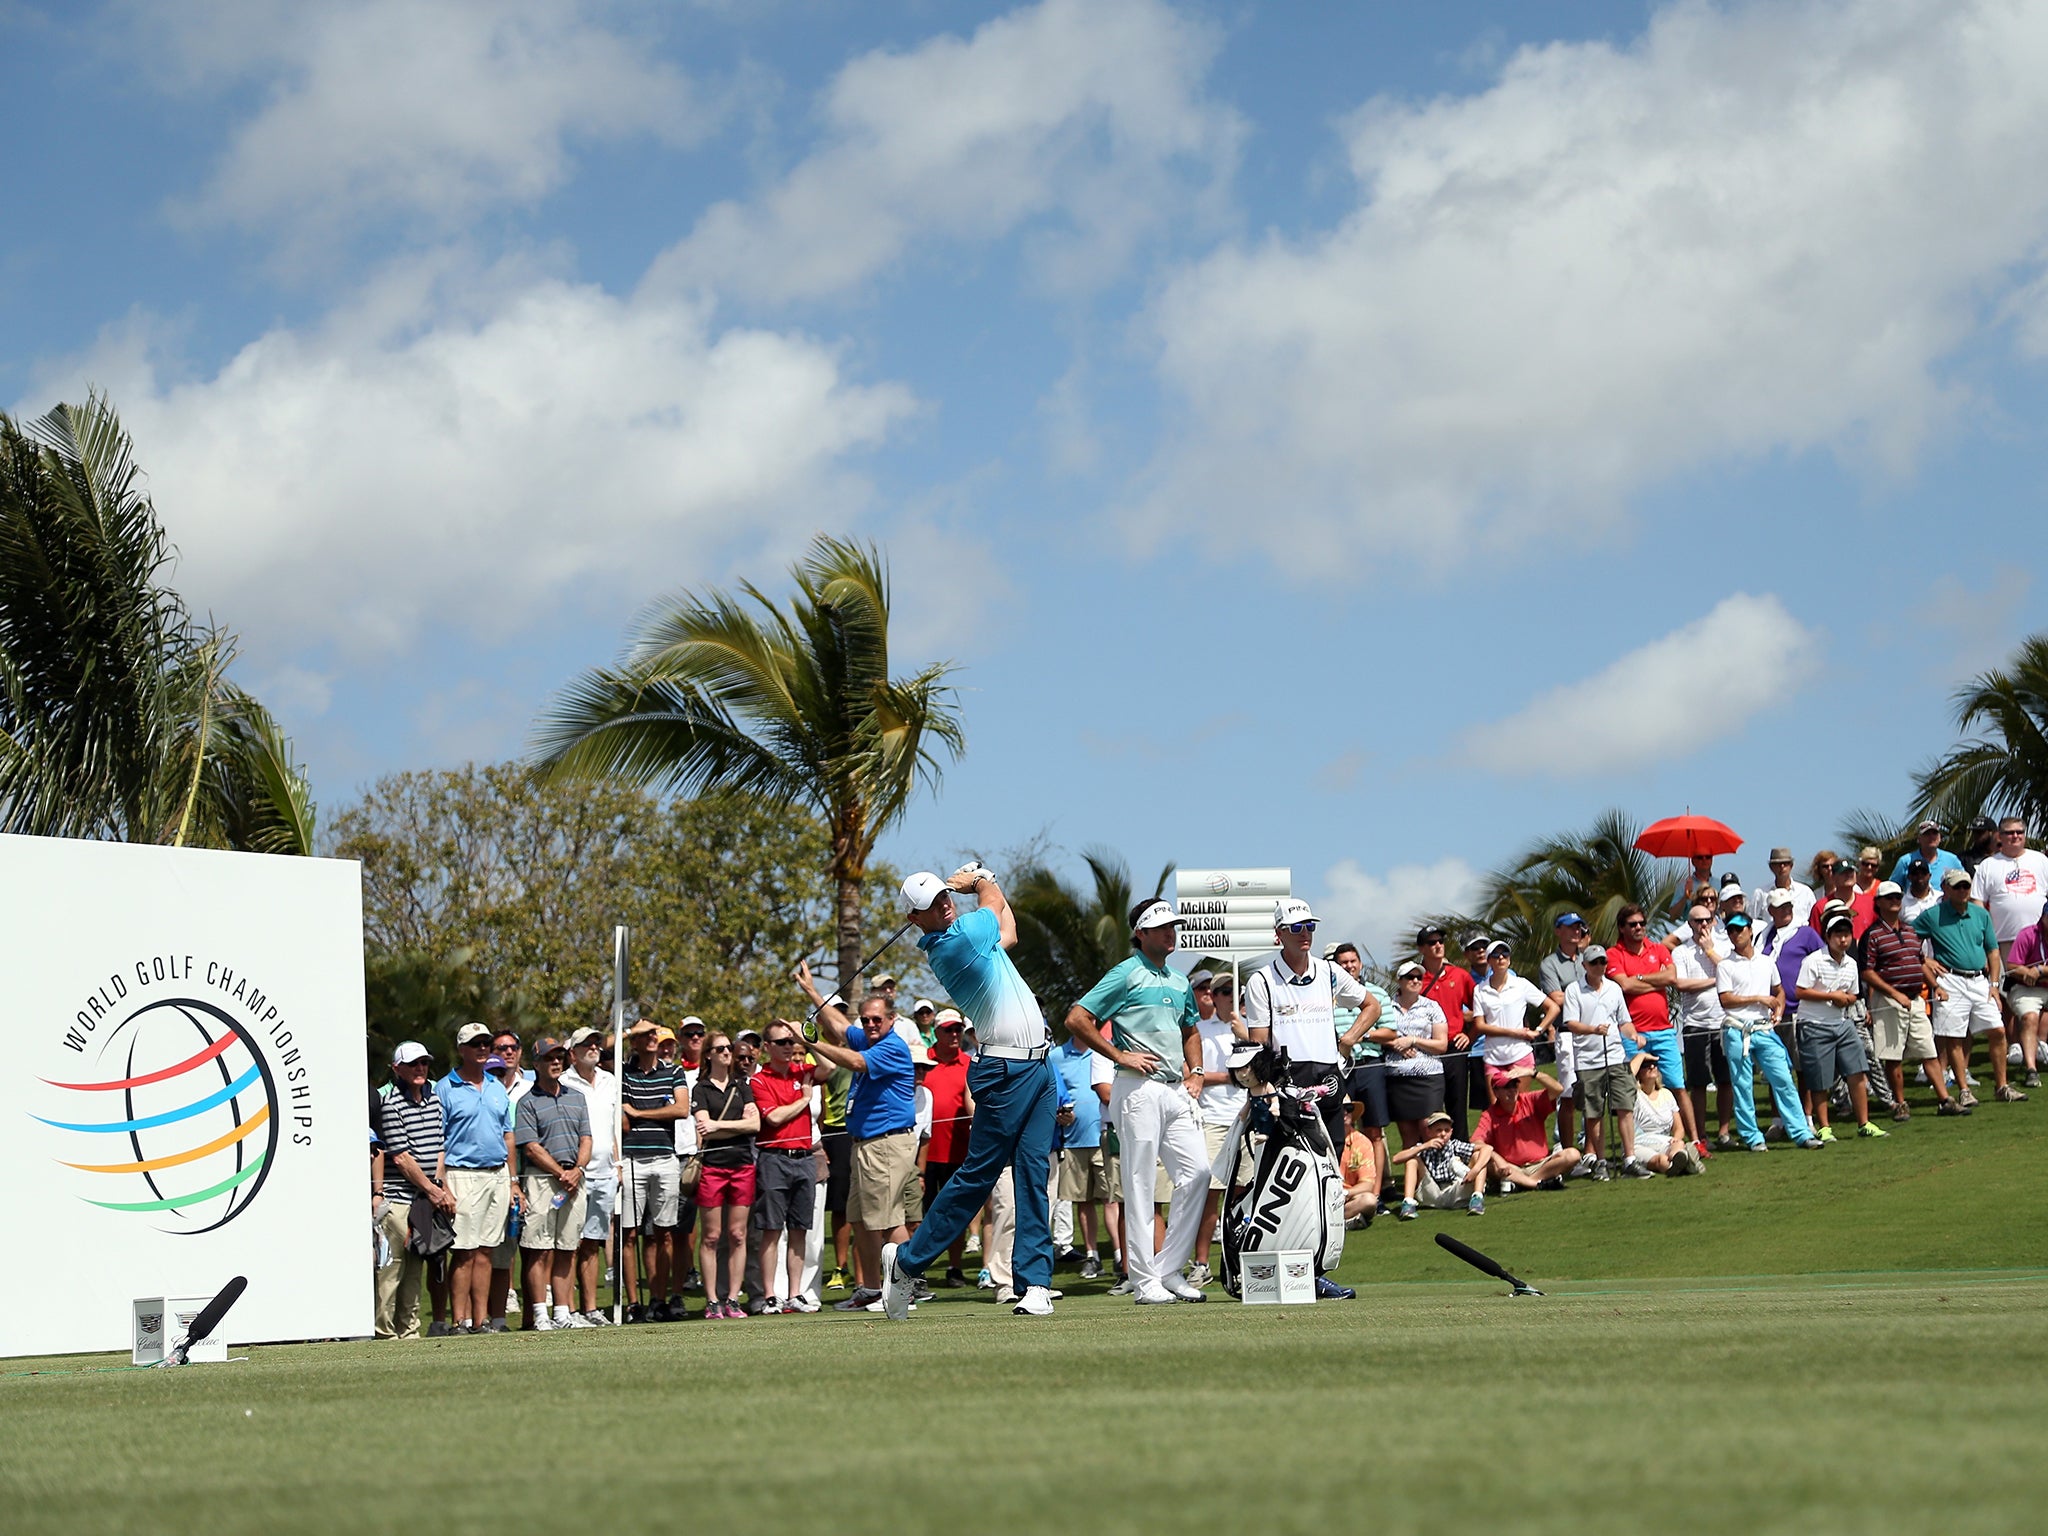 Rory McIlroy tees off at the 16th hole at Doral yesterday